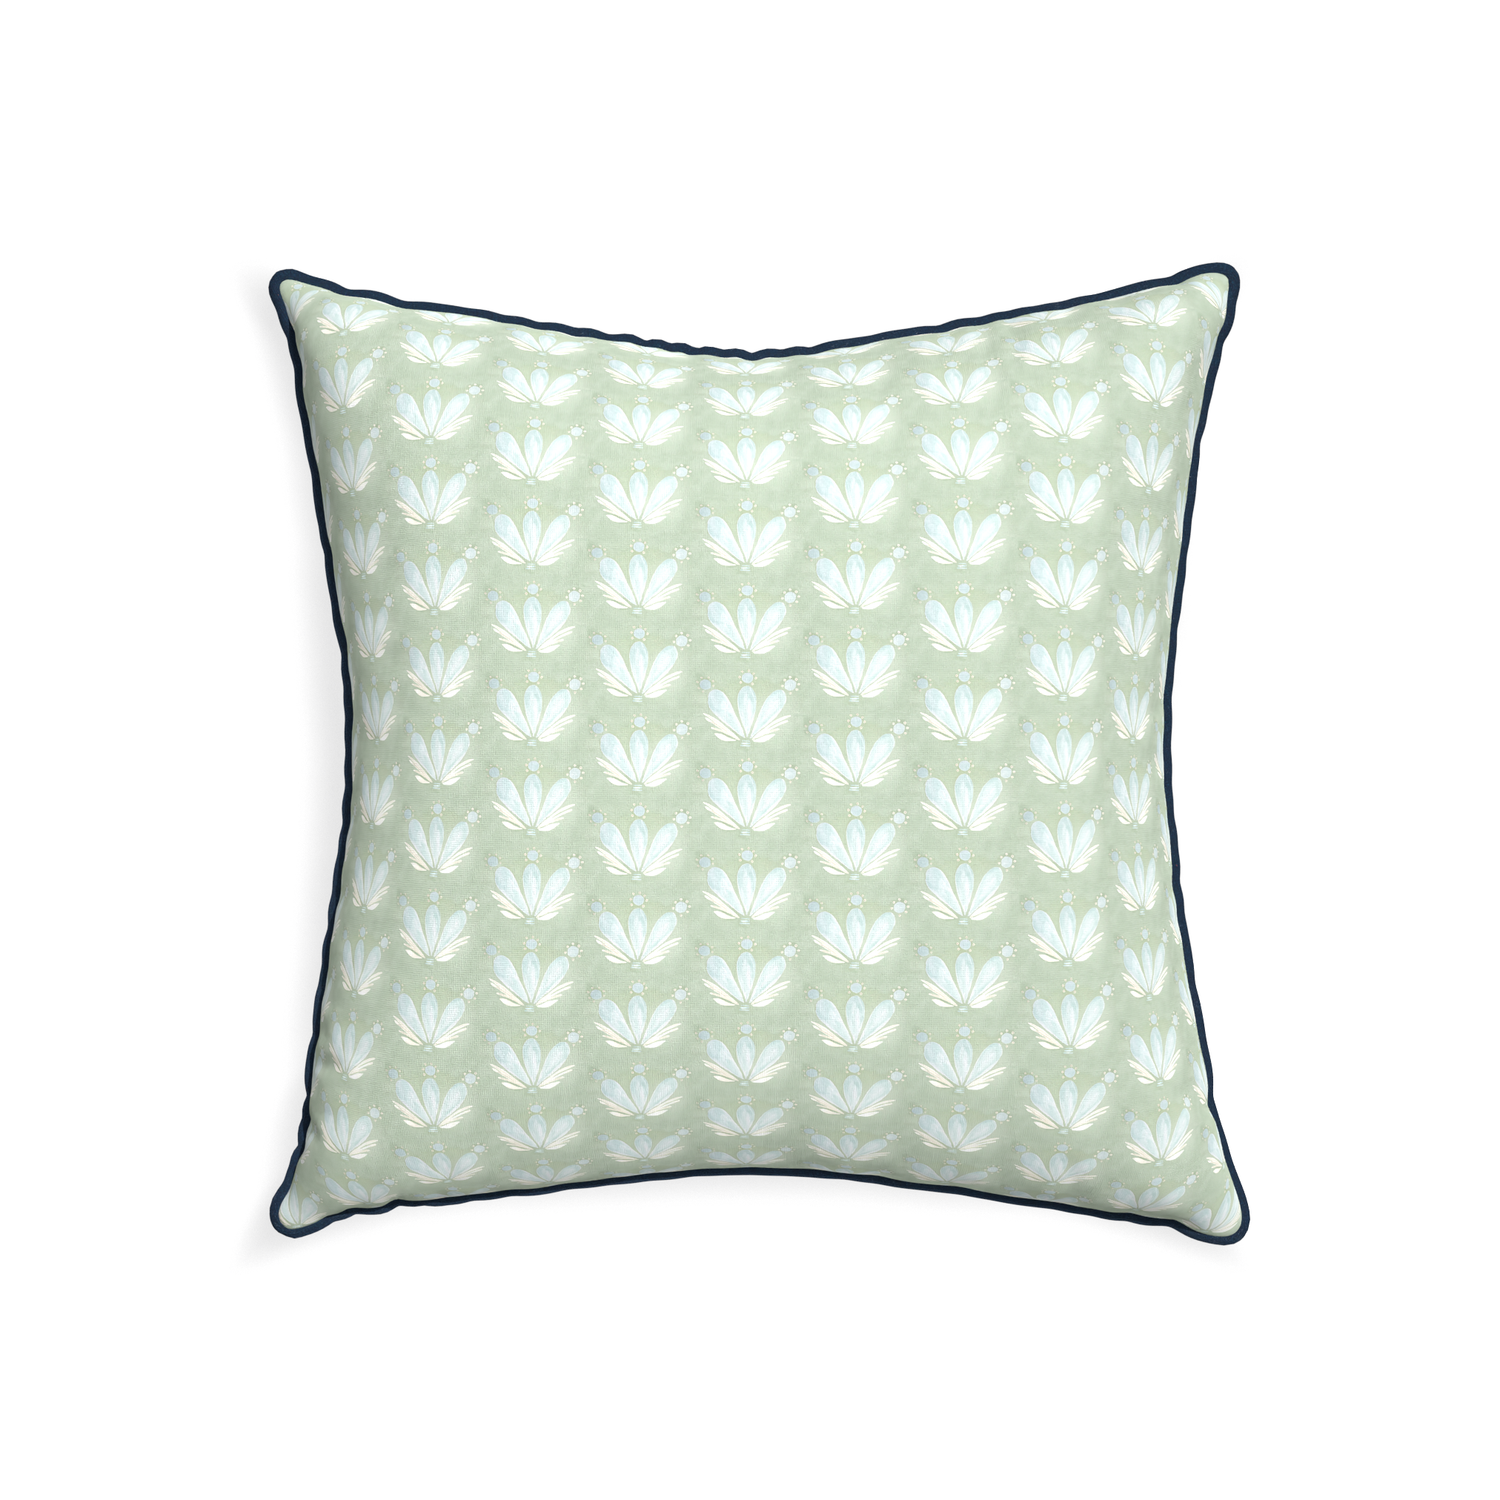 22-square serena sea salt custom blue & green floral drop repeatpillow with c piping on white background